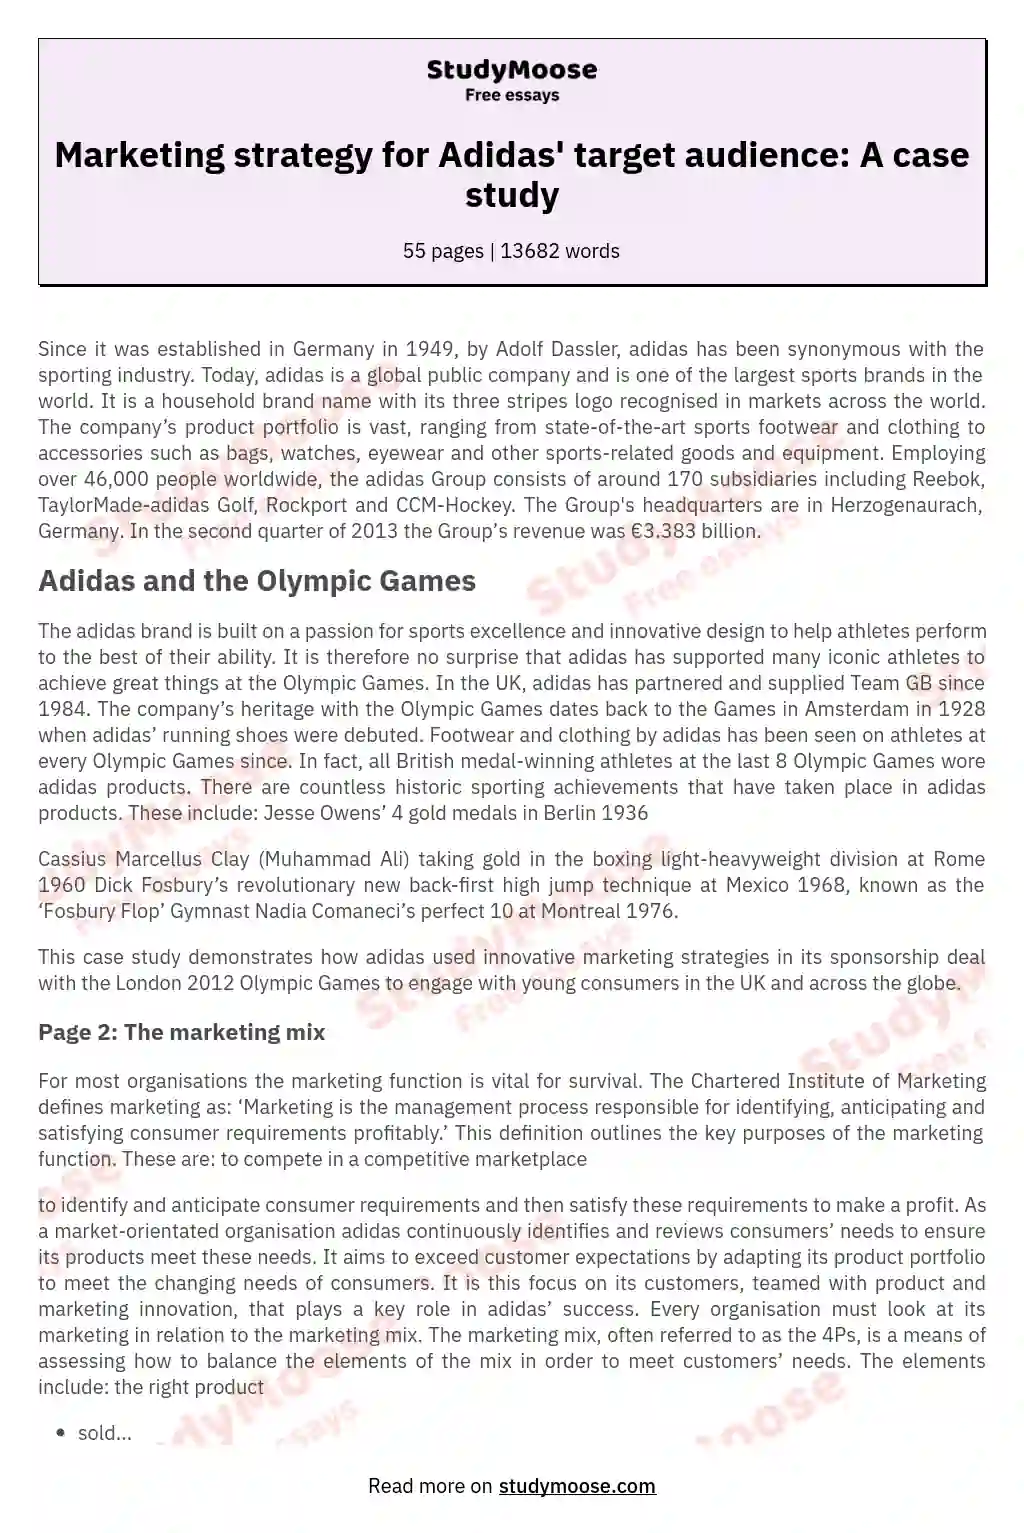 Marketing strategy for Adidas' target audience: A case study